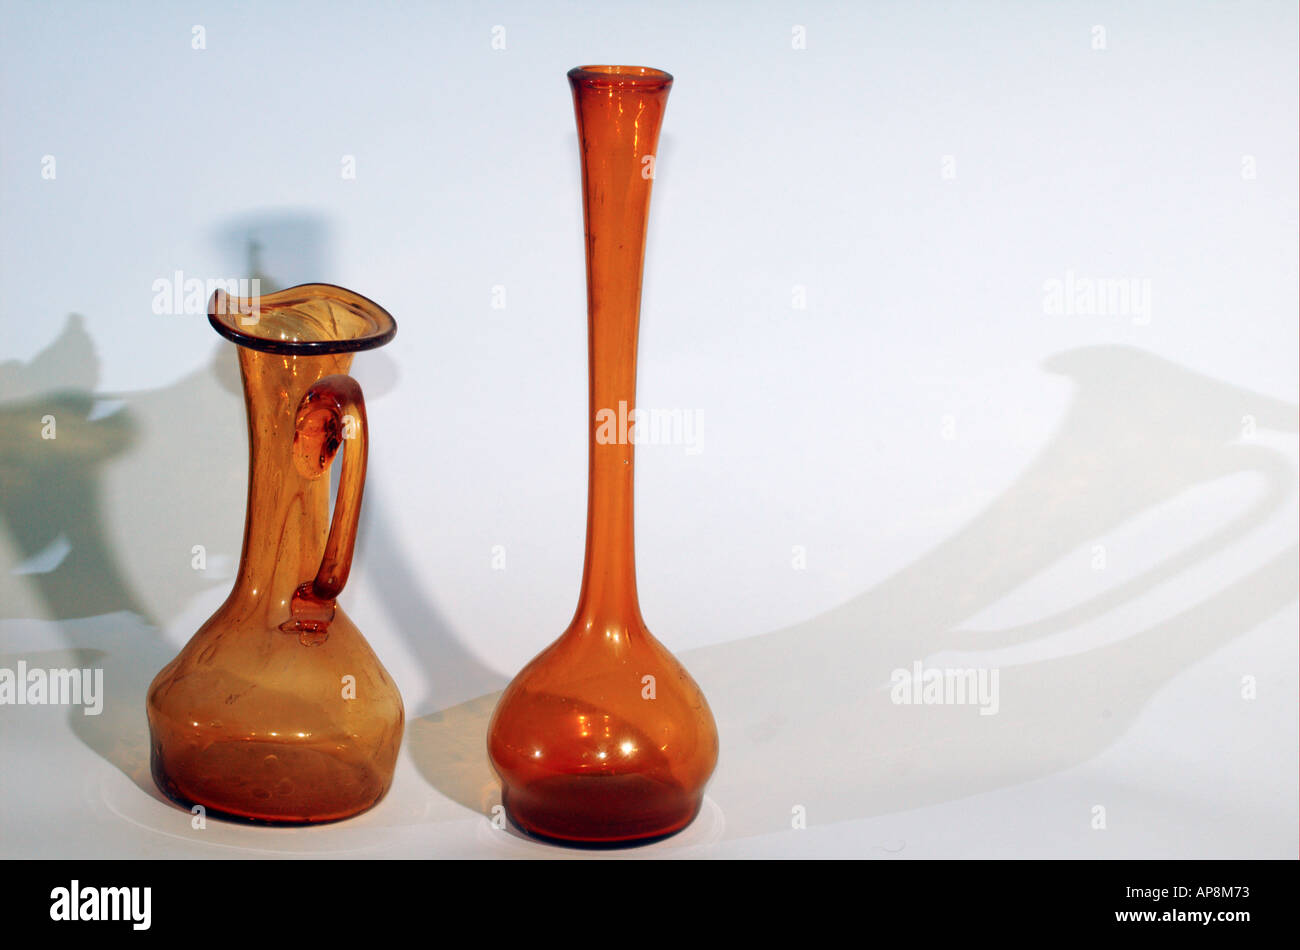 https://c8.alamy.com/comp/AP8M73/two-brown-vases-of-hebron-glass-glassblowing-in-hebron-is-a-traditional-AP8M73.jpg